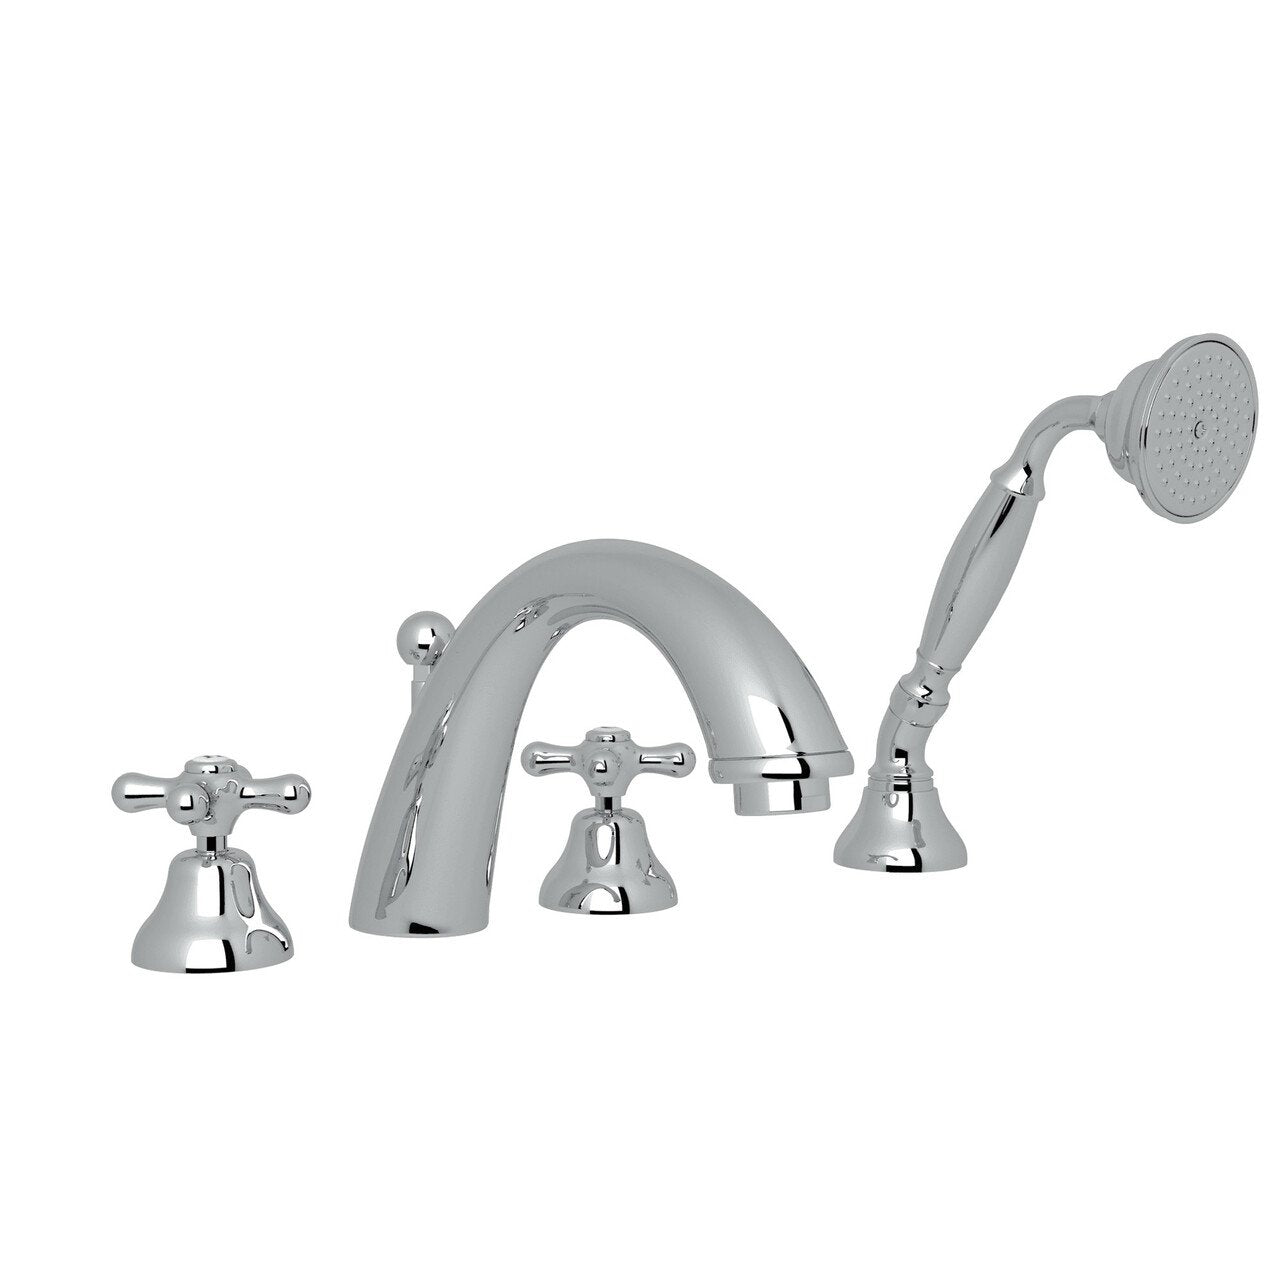 ROHL Verona 4-Hole Deck Mount C-Spout Tub Filler with Handshower - BNGBath